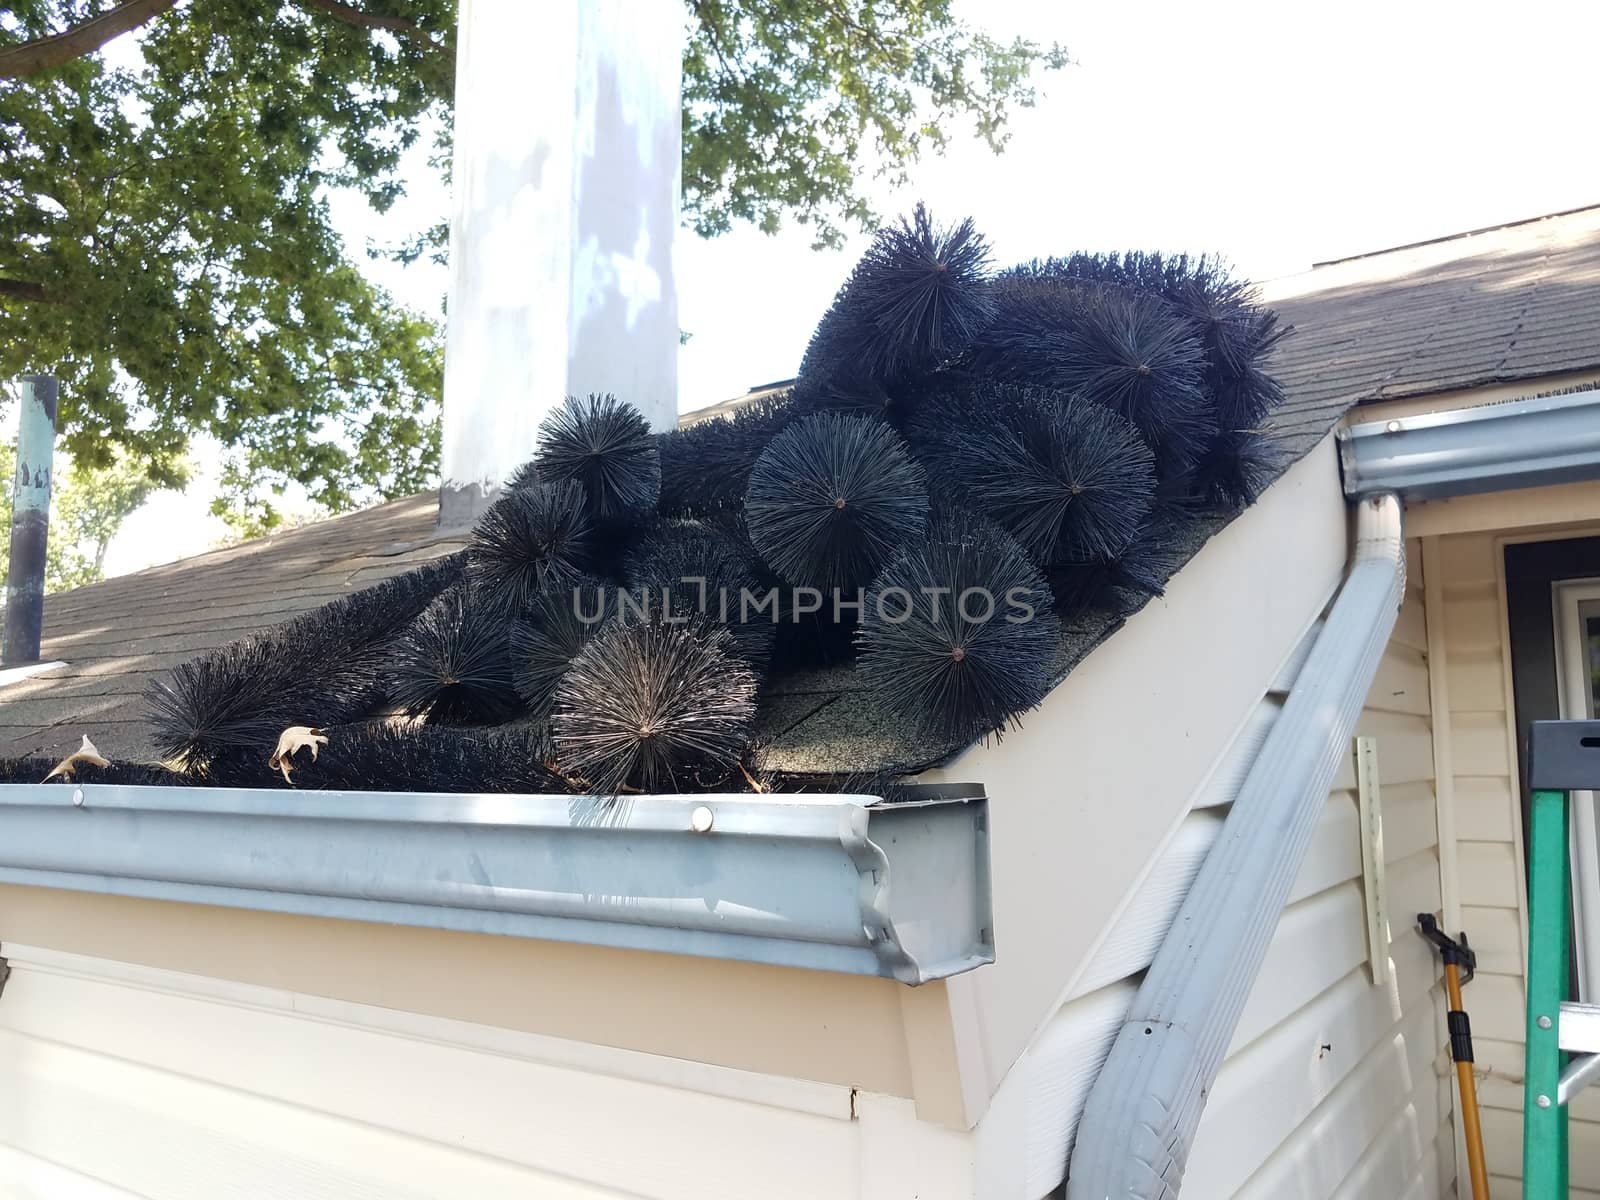 black pipe cleaner and gutter with roof of house by stockphotofan1